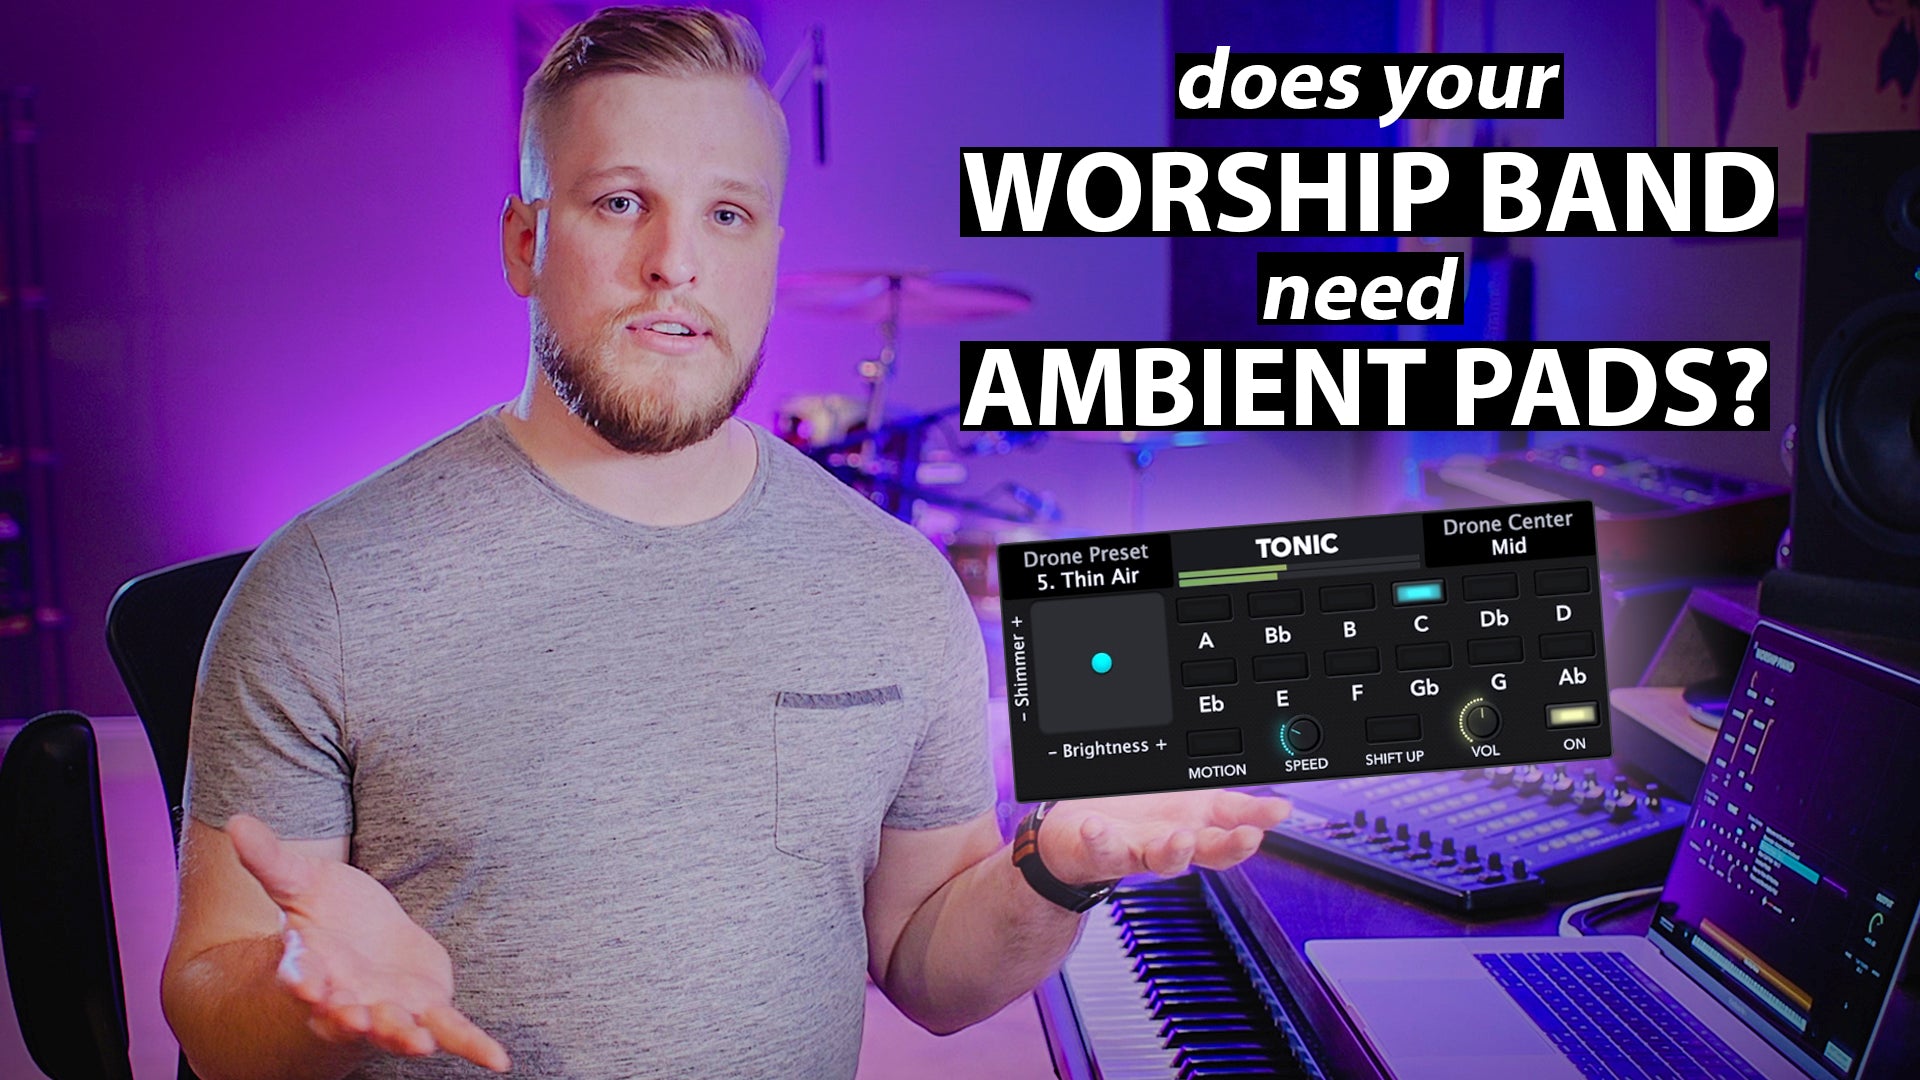 Does Your Worship Band Need Ambient Pads?